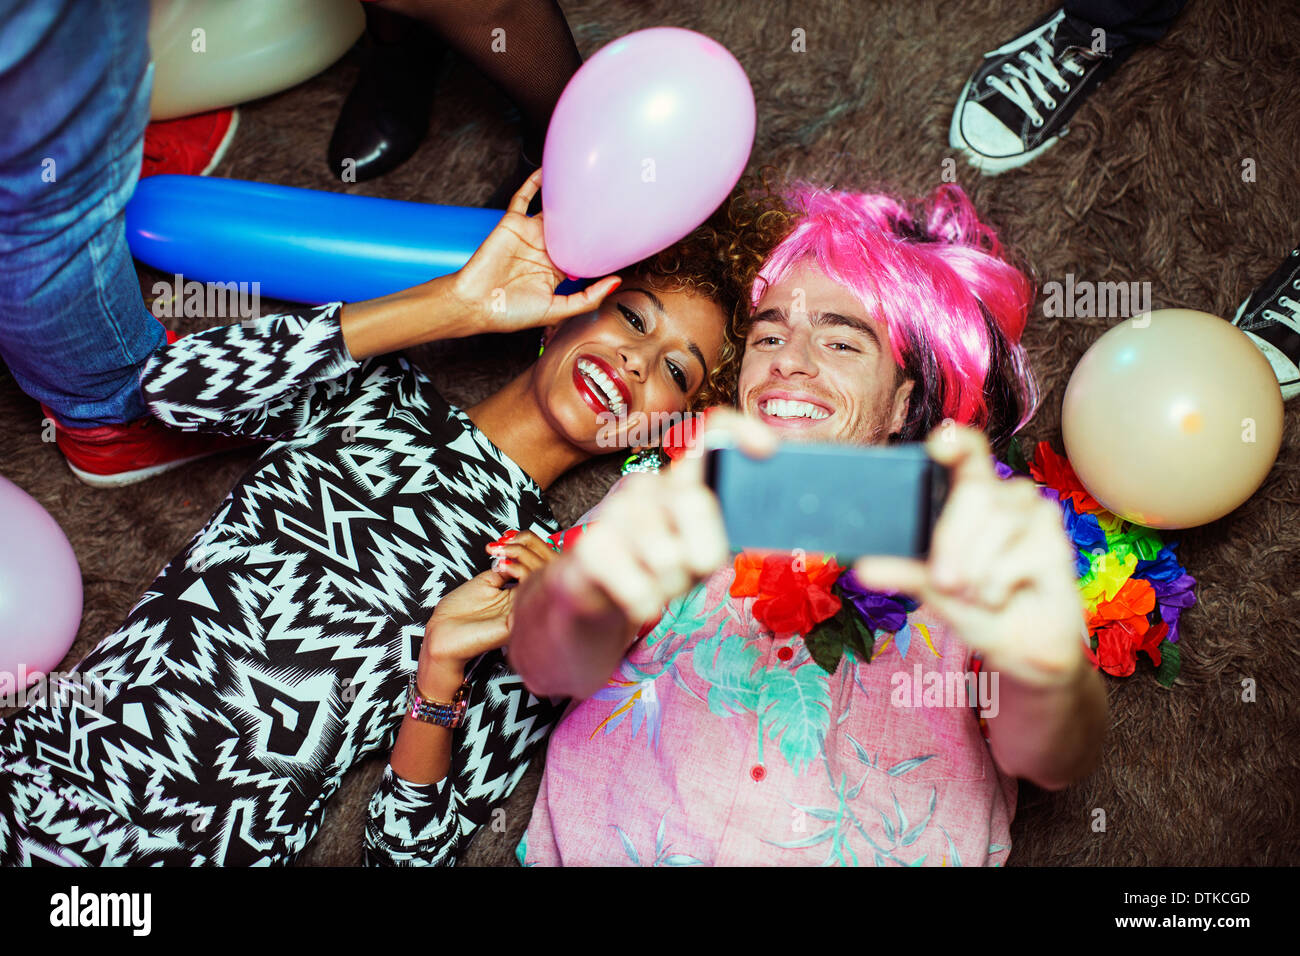 Couple taking self-portrait with cell phone on floor at party Stock Photo